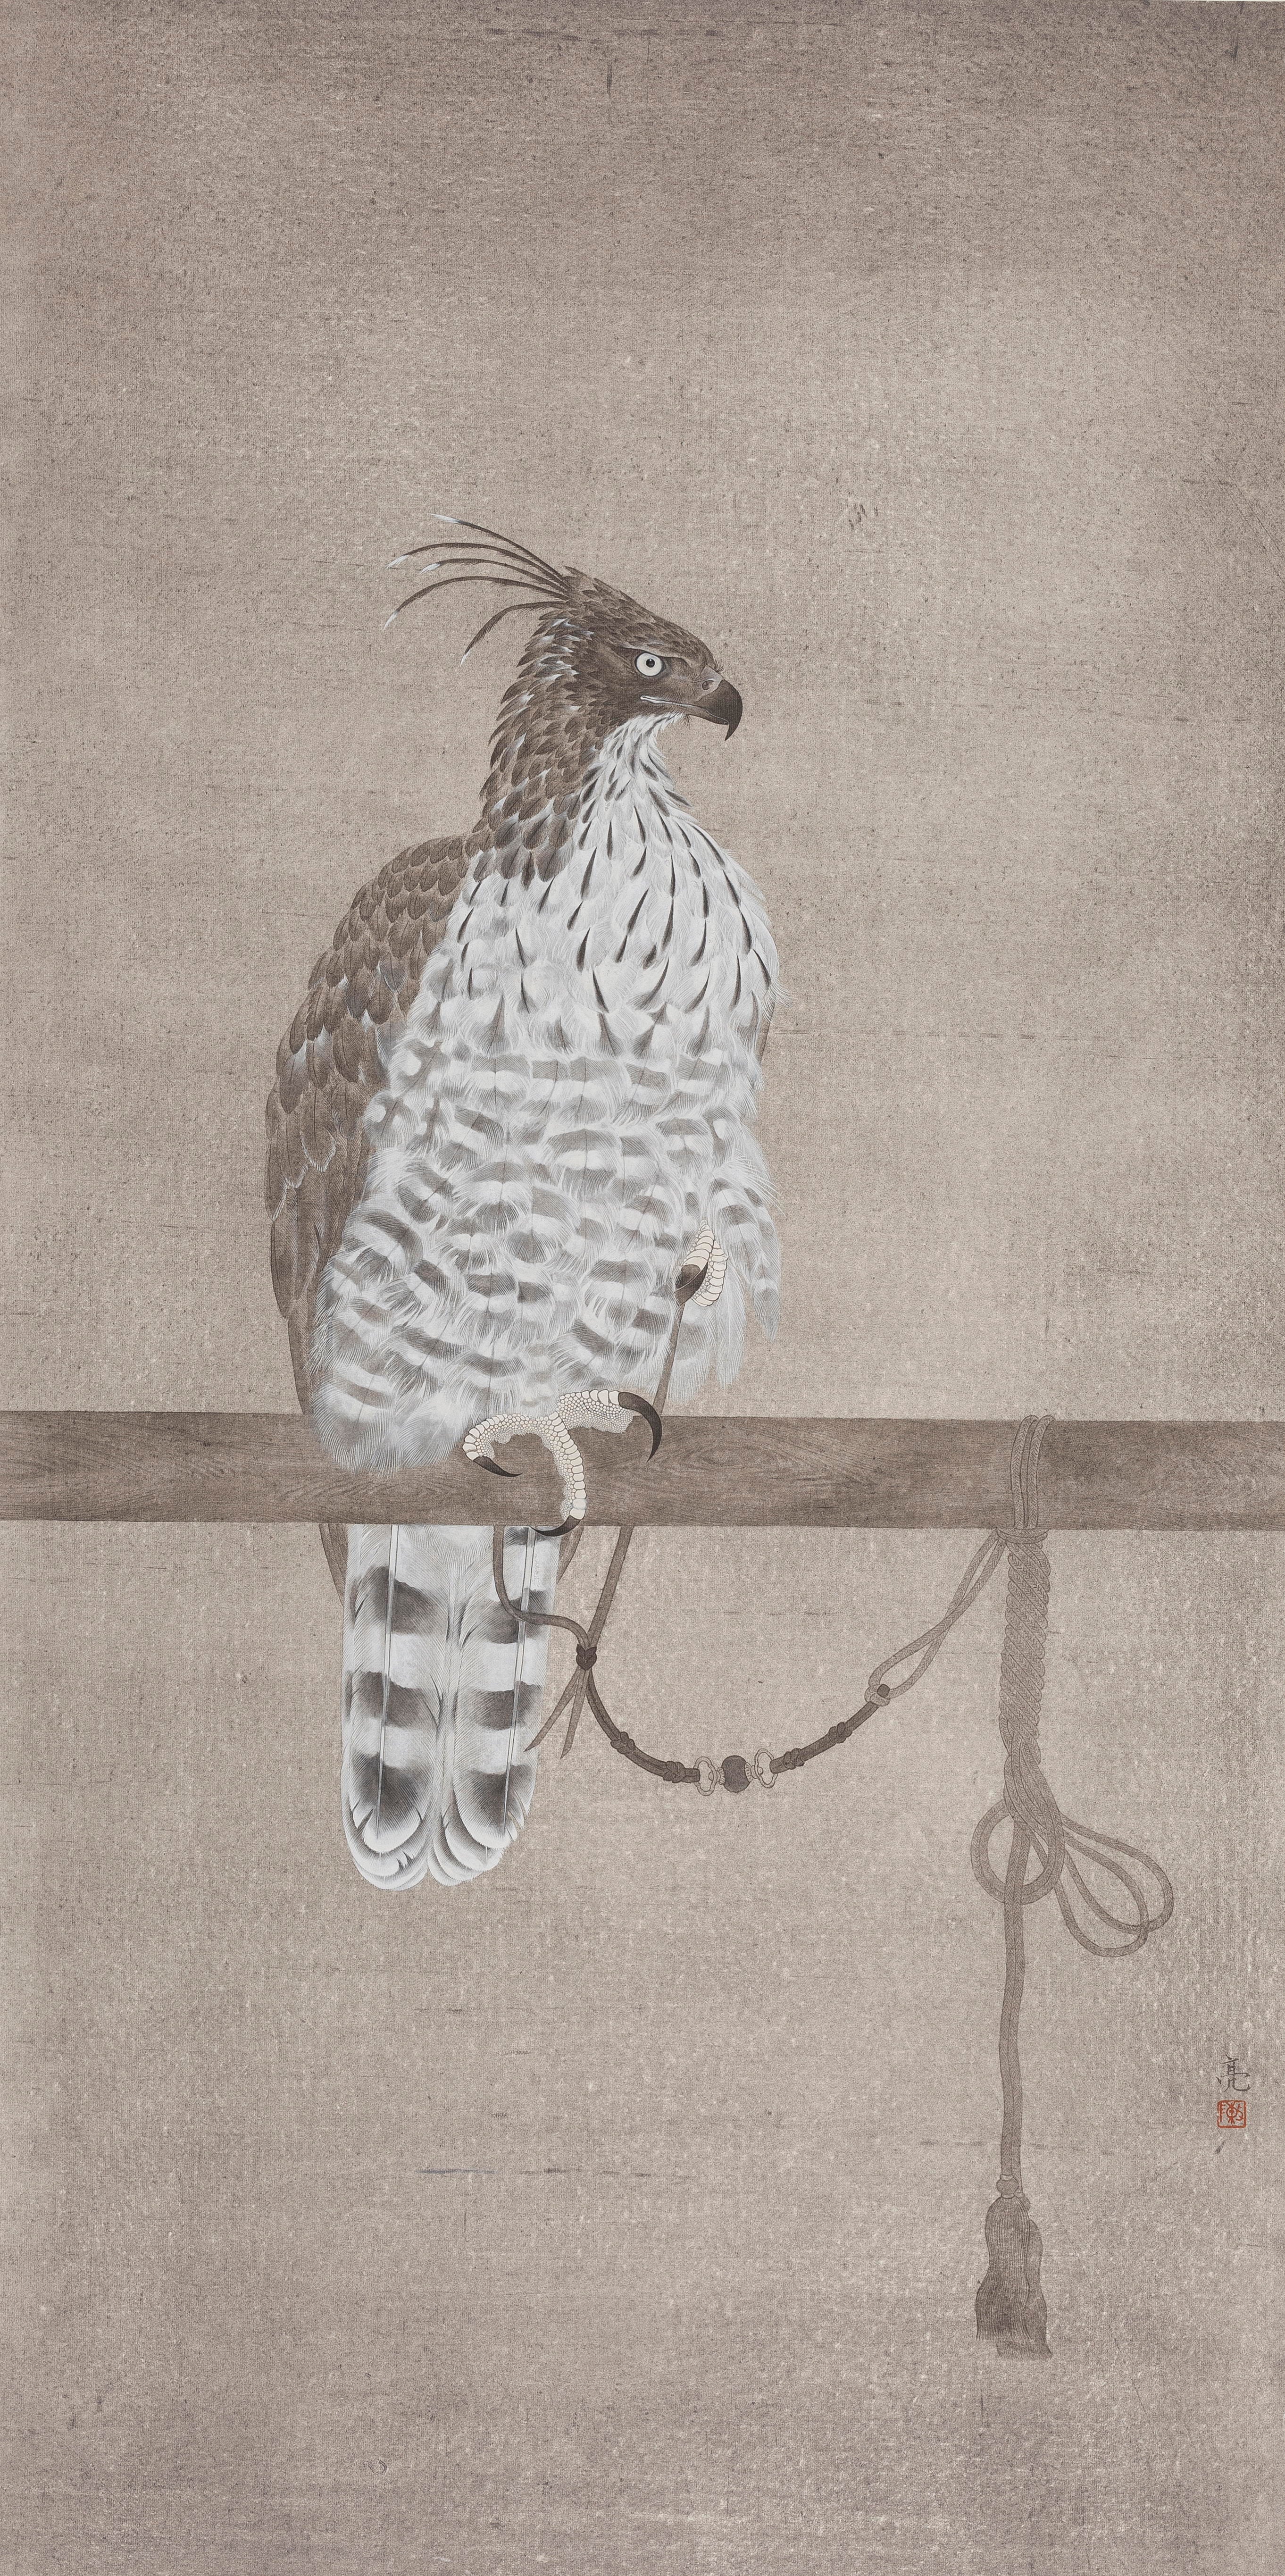 Painting of Eagle, Chen Liang 《御雕图》陈亮